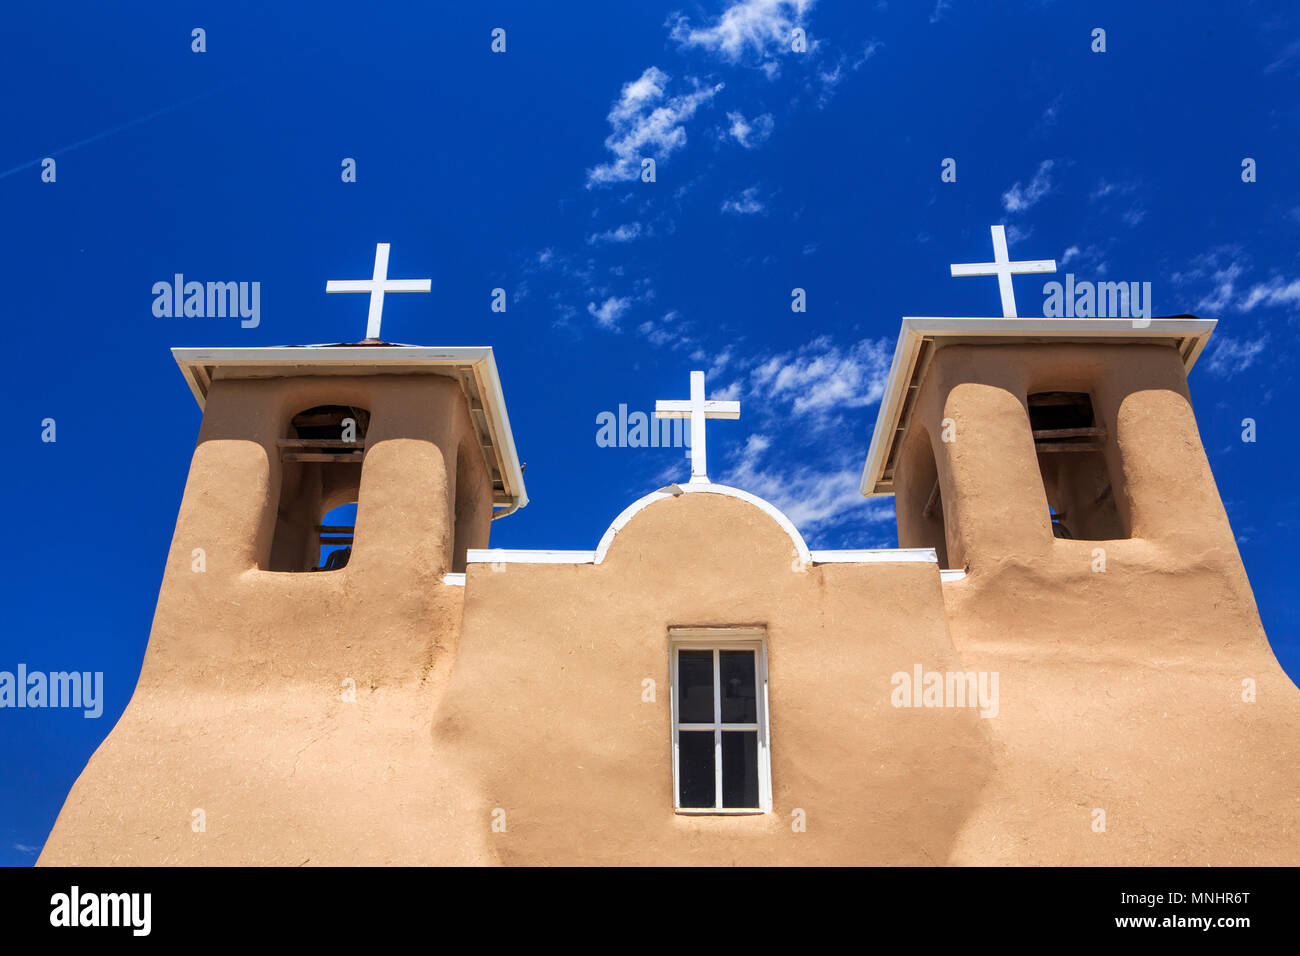 The San Francisco de Asis mission church in Taos, New Mexico is one of the most iconic structures in the Southwest and has been named a World Heritage Site by UNESCO and a U.S. National Historic Monument. Stock Photo